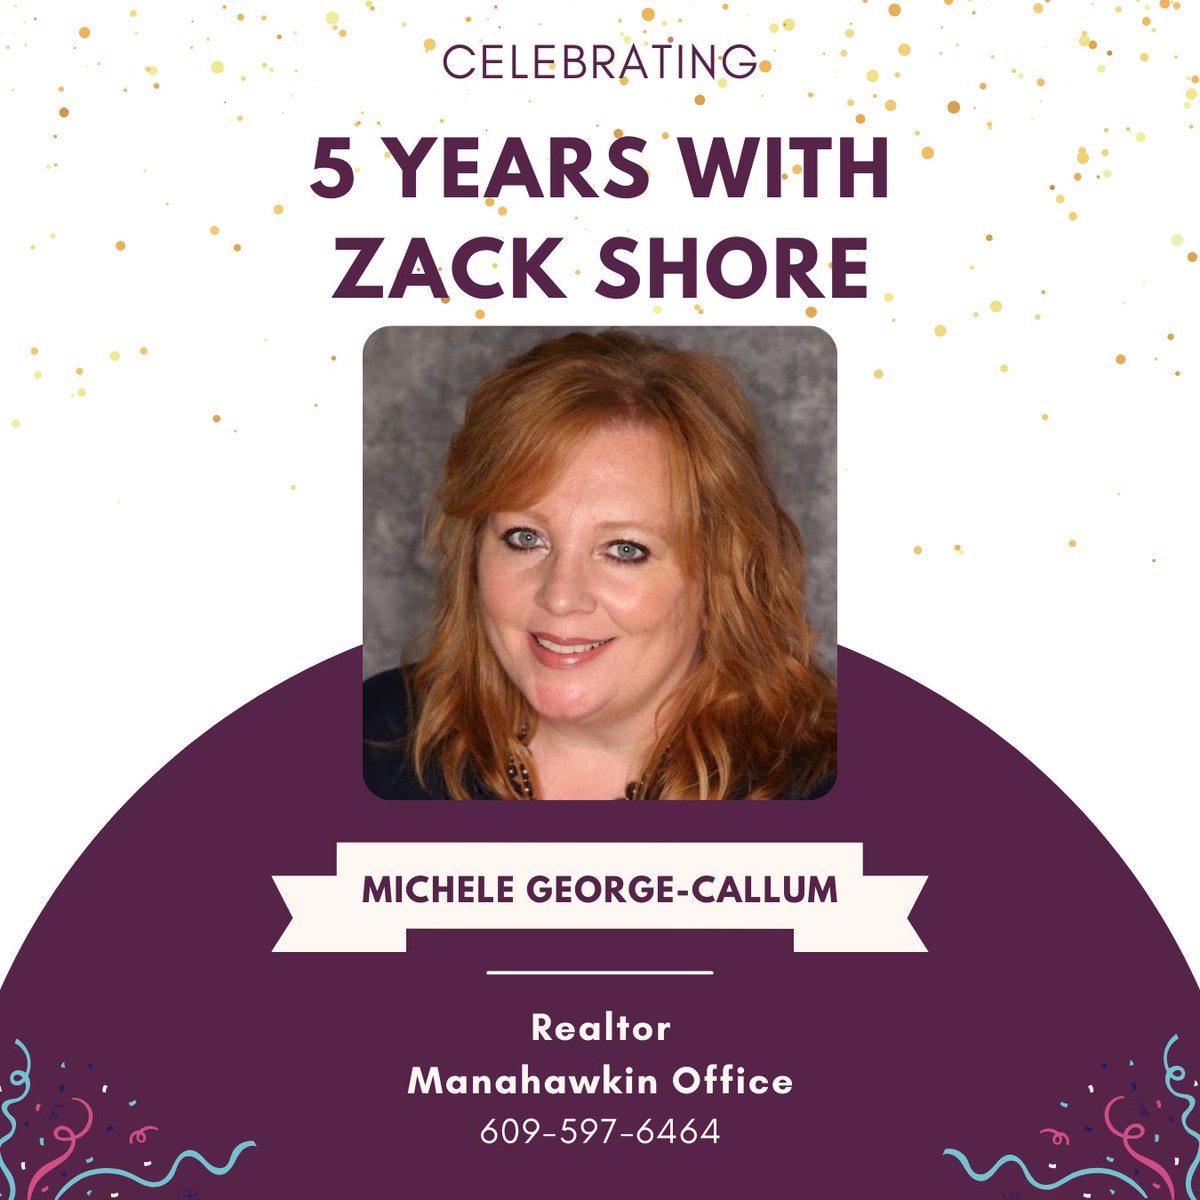 Today we are celebrating Michele George-Callum’s 5th anniversary with BHHS Zack Shore! Please congratulate her! 🎉
#bhhs #bhhszackshore #bhhsrealestate #njrealestate #njrealtor #workanniversary #manahawkinrealestate #manahawkinnj